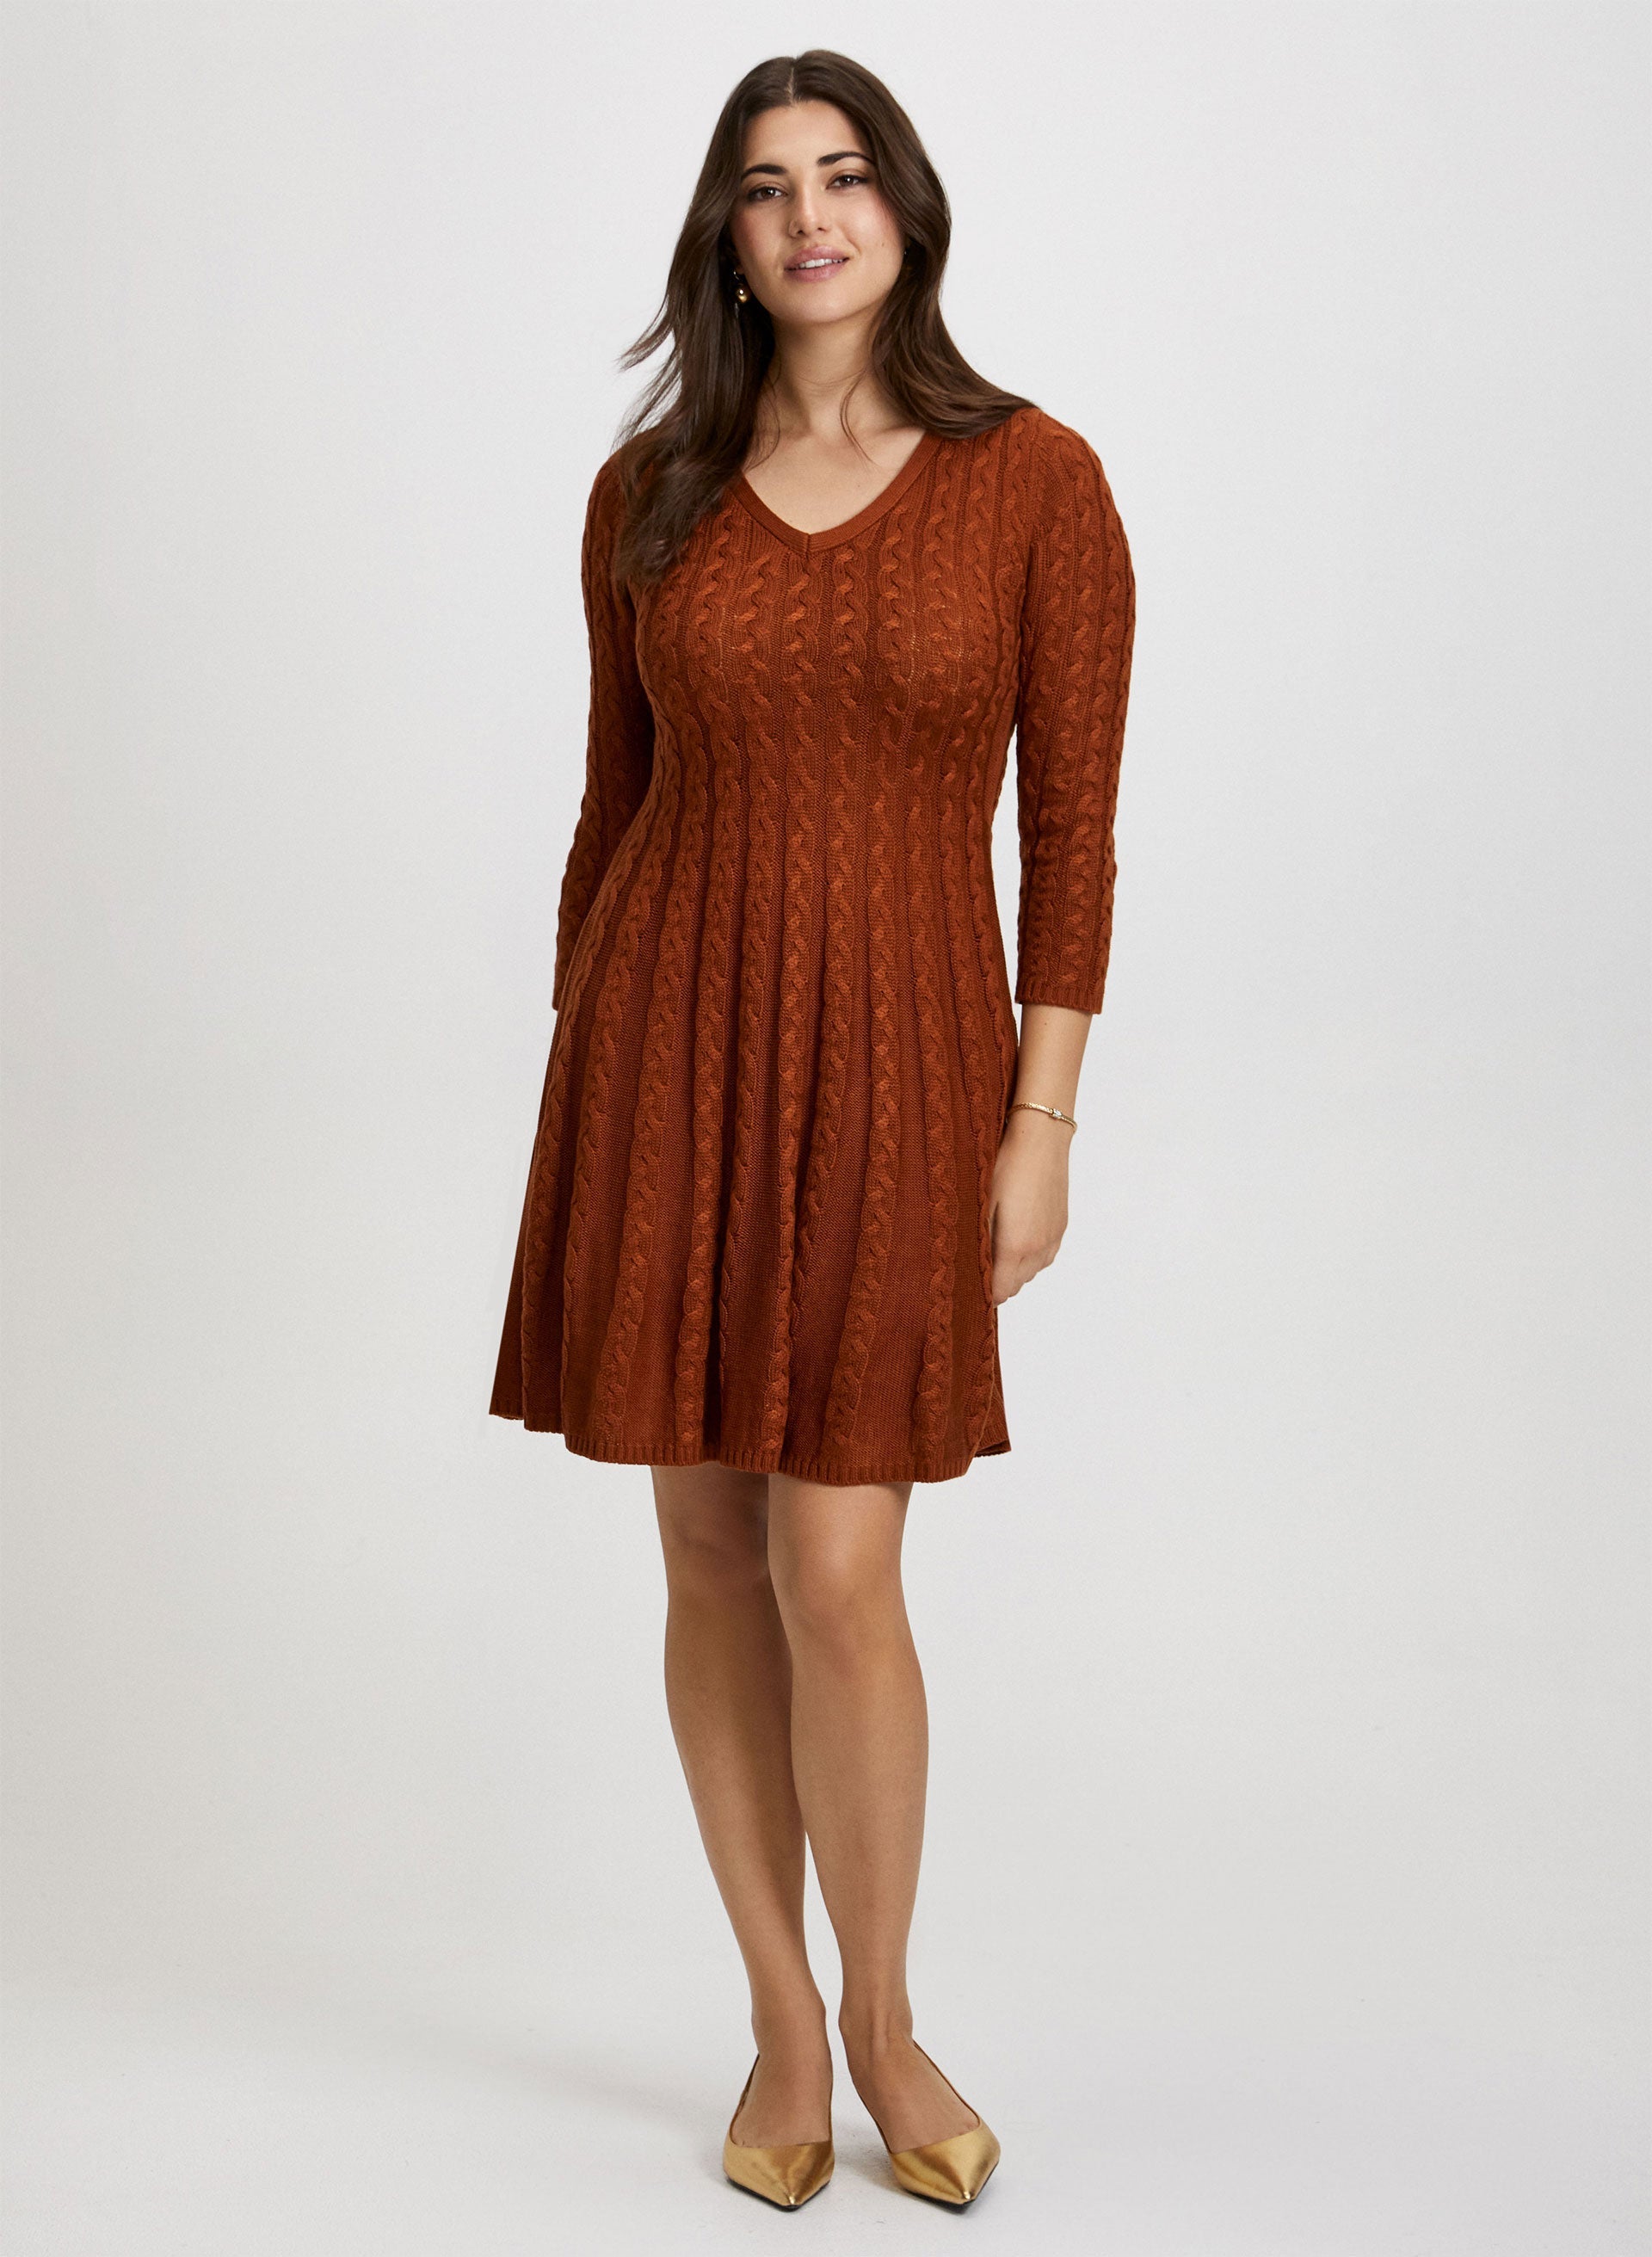  MAGUZA Women's Oversized Cable Knit Sweater Dress for